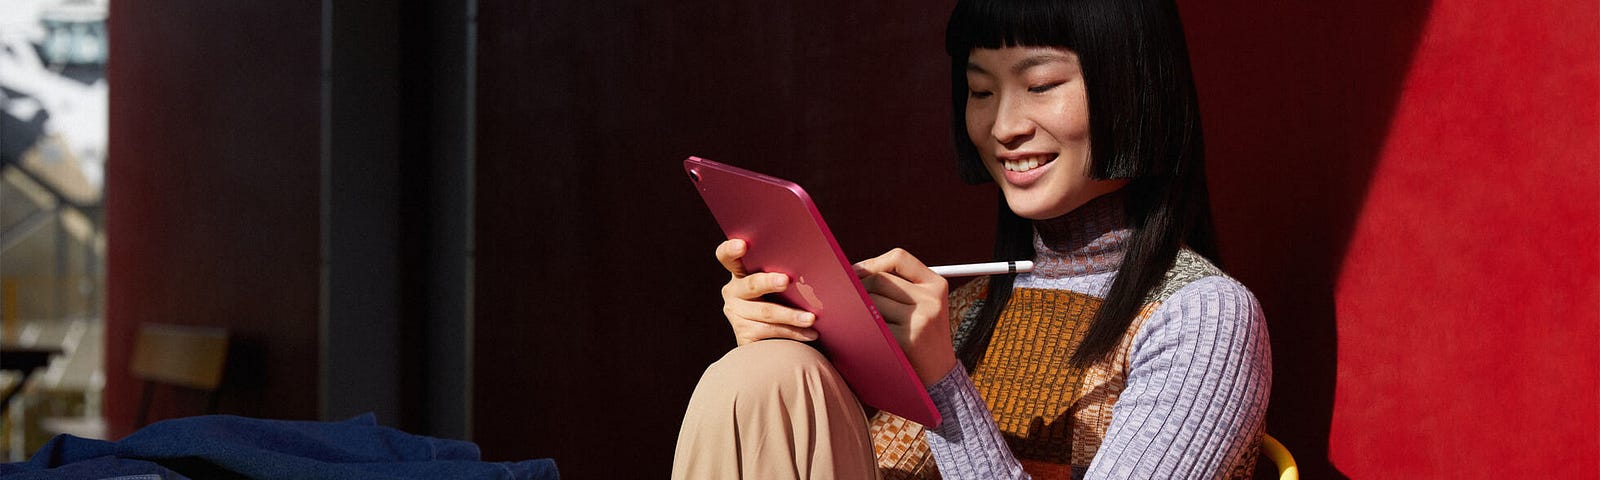 A person sitting on a desk using Apple Pencil on a pink iPad.